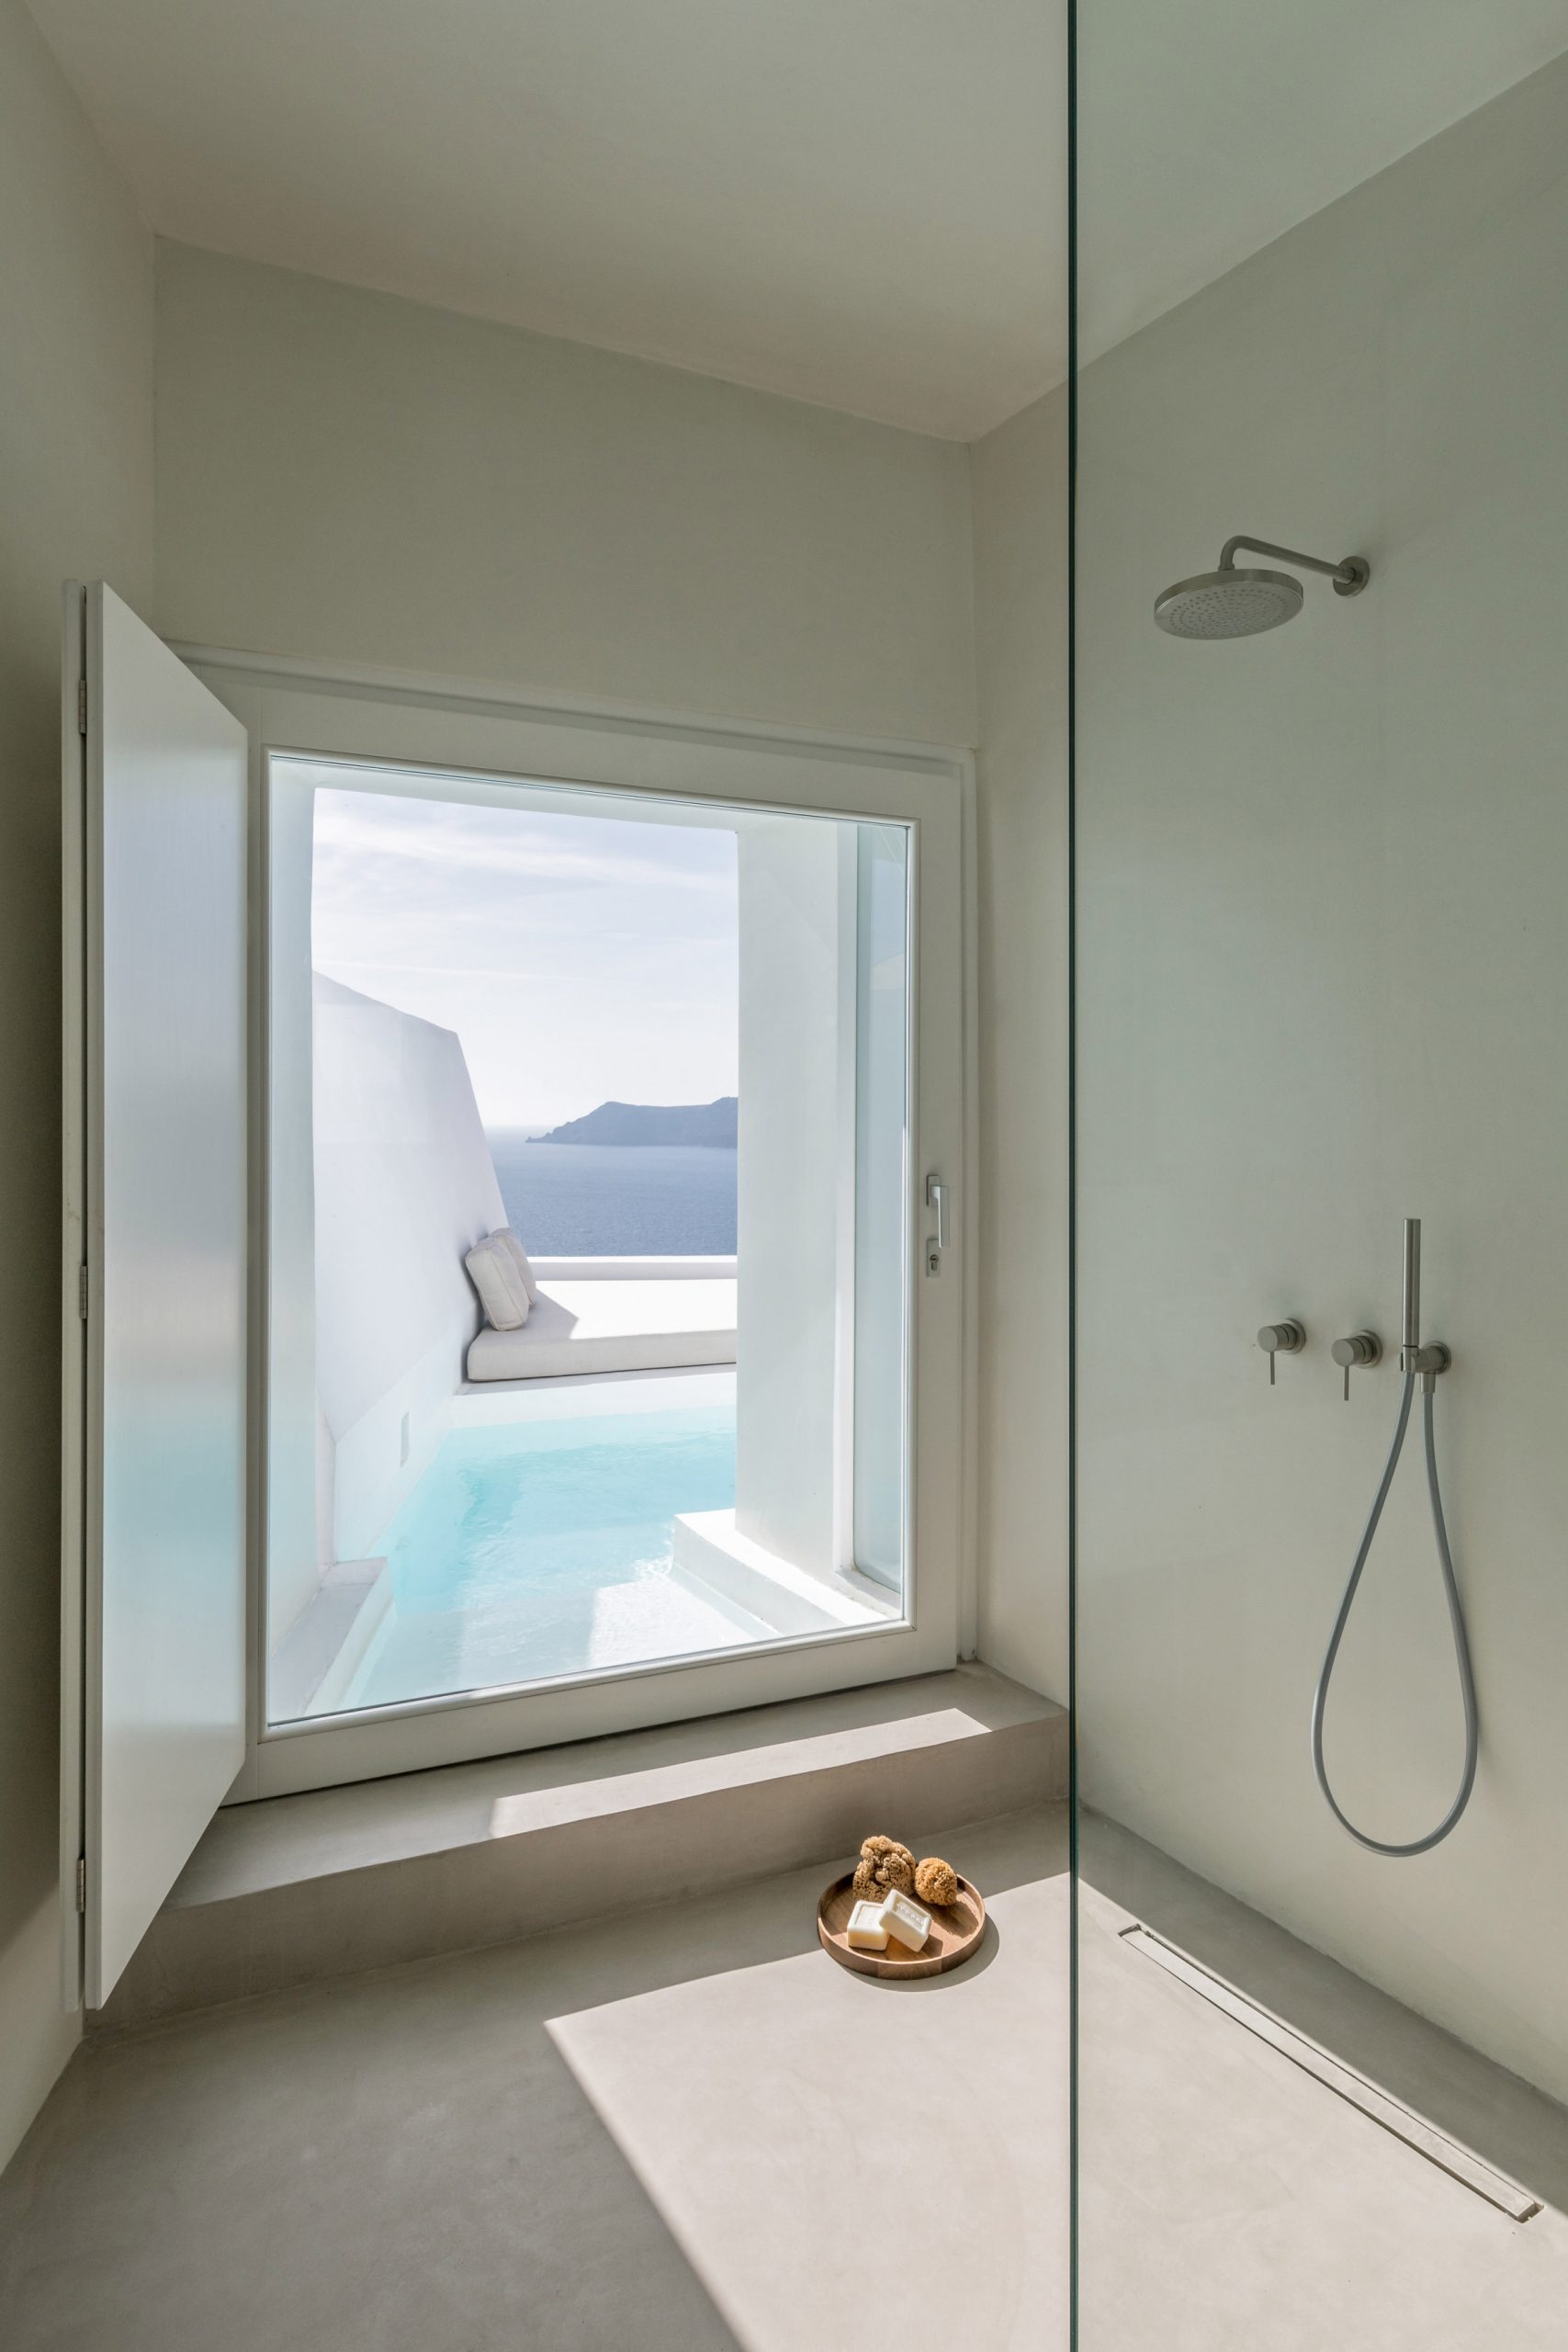 Minimalist hotel bathroom with view of the sea